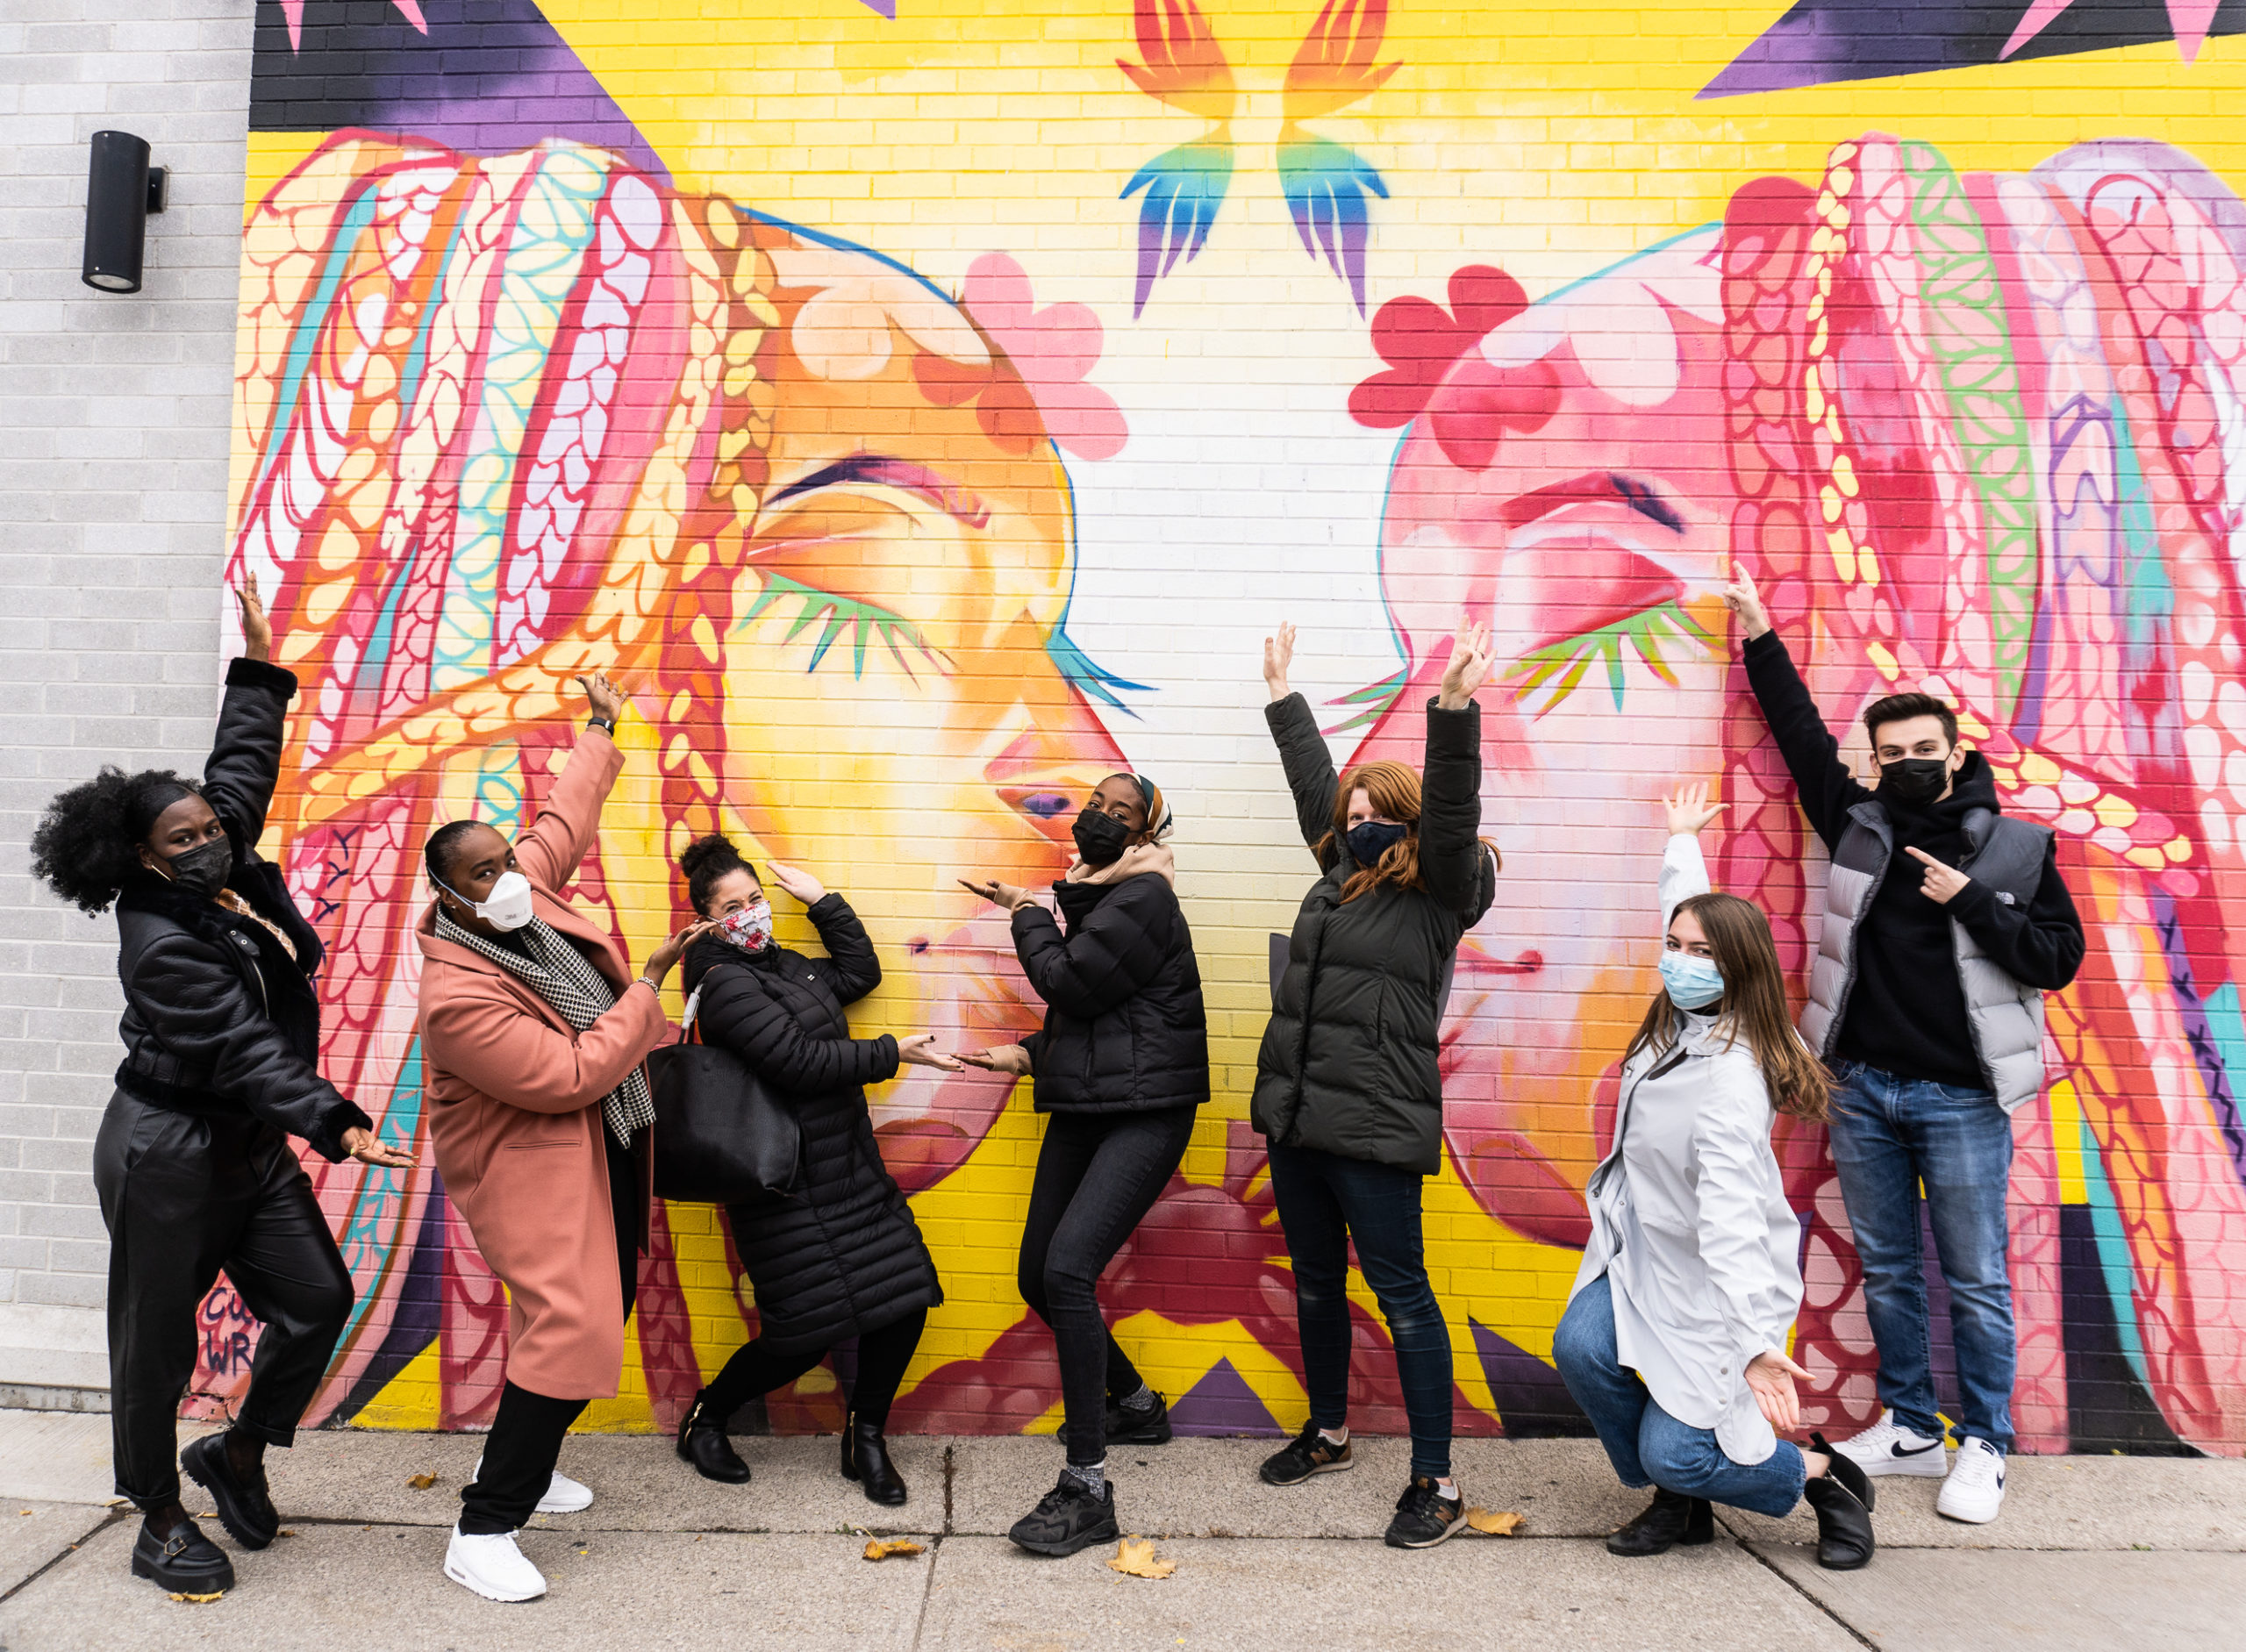 Photograph of Curtia Wright’s ‘Celebrating Queer Black Lives’ mural painted on the side of a building. The mural has two side-facing portraits, with floral patterns and is brightly coloured. There are seven people striking playful poses in front of it.